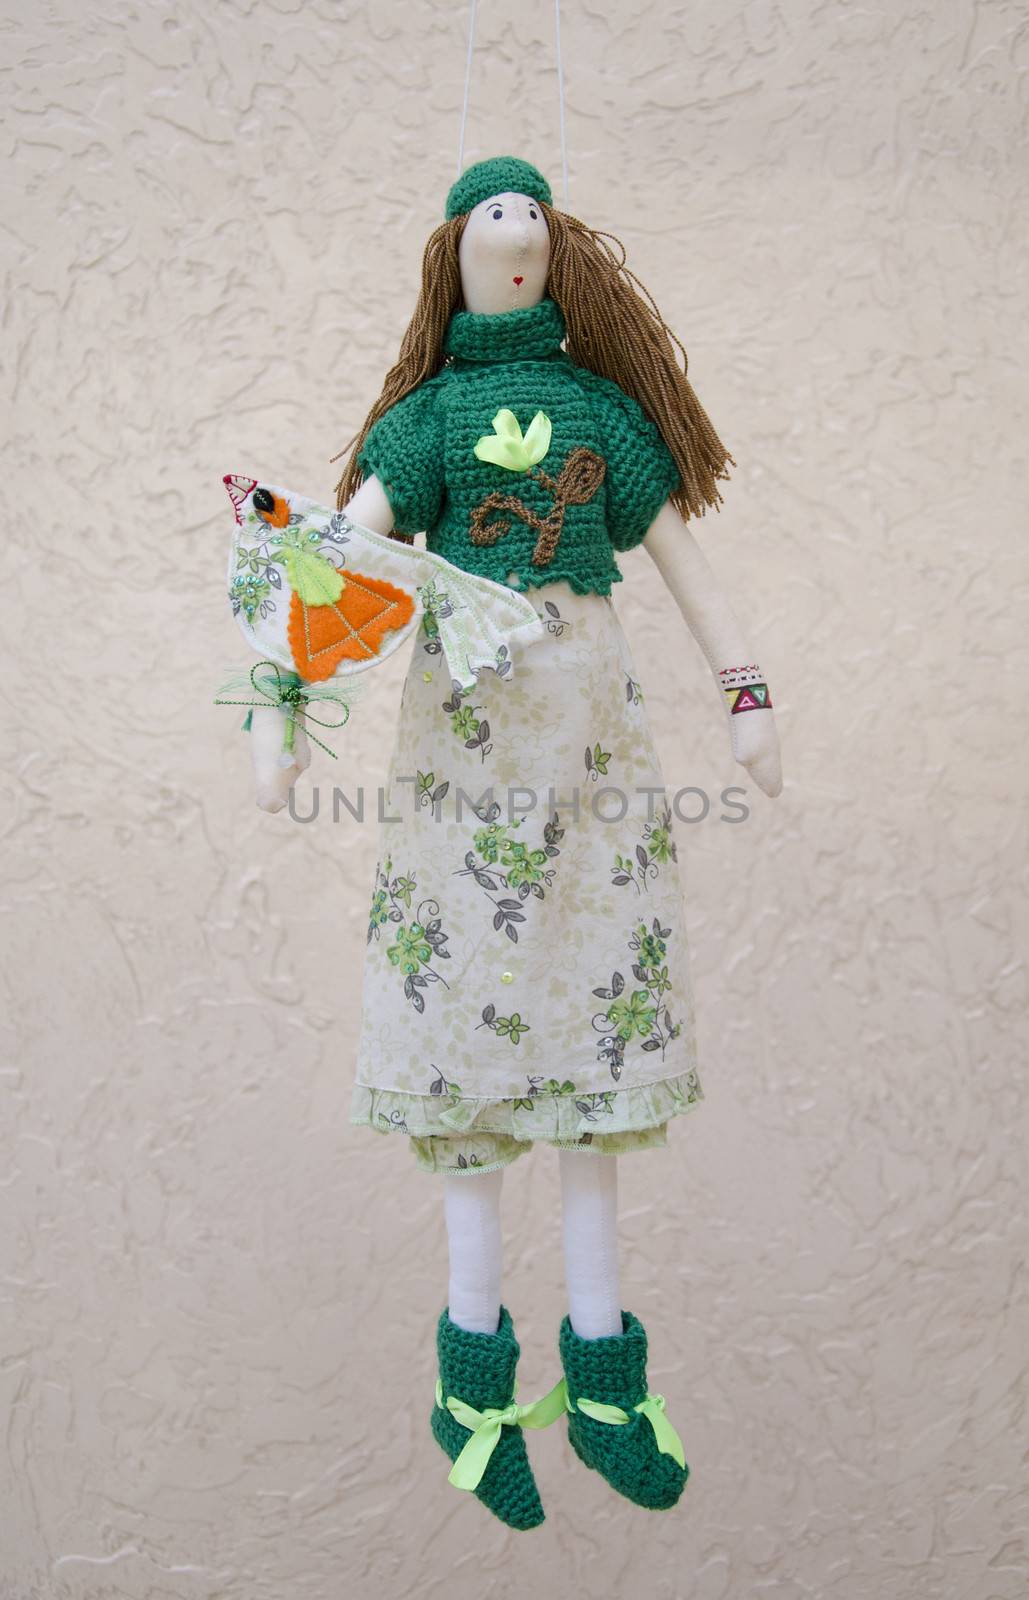 The Handmade doll with a bird on the hand in a dress and sweater on a string